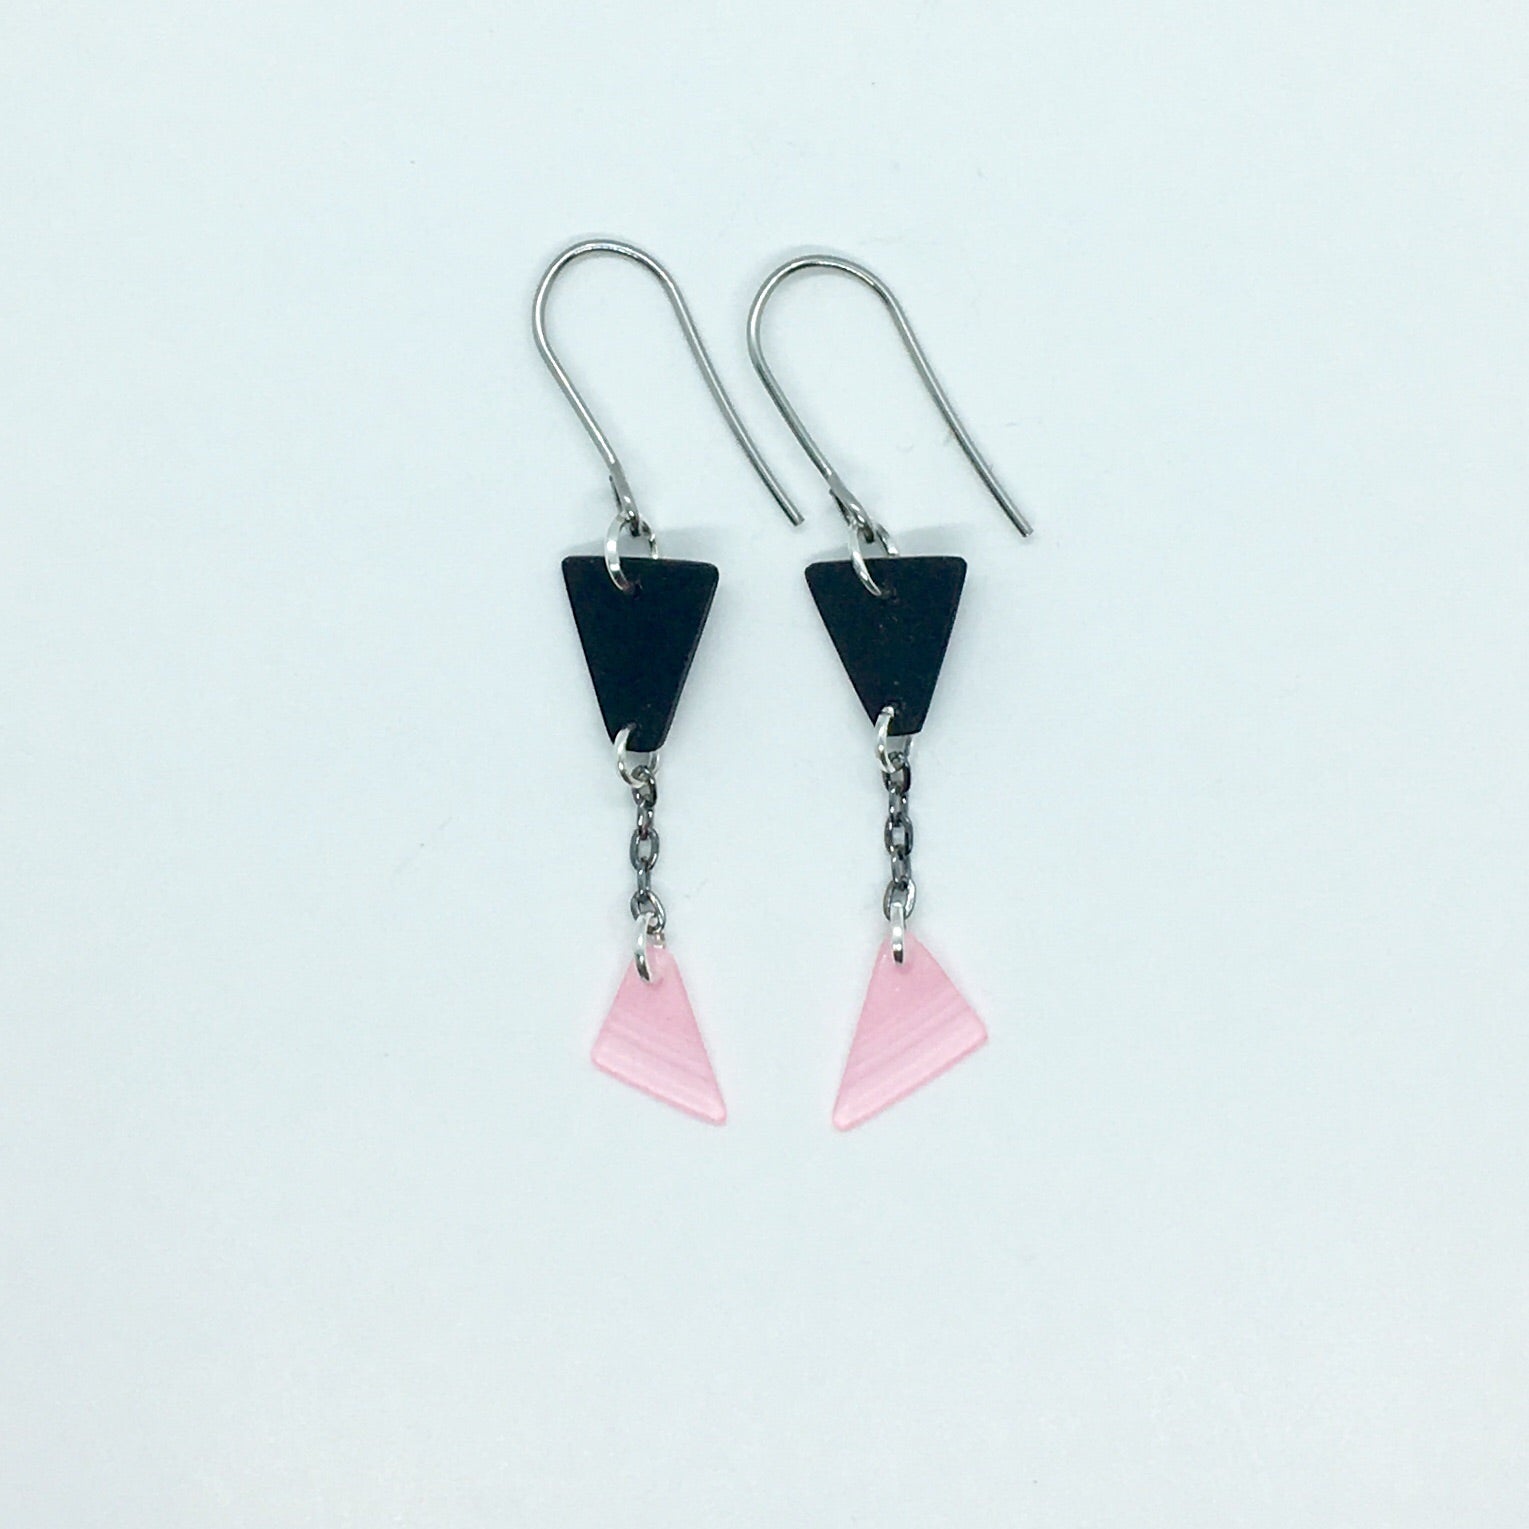 Black and pink dangling triangle earrings